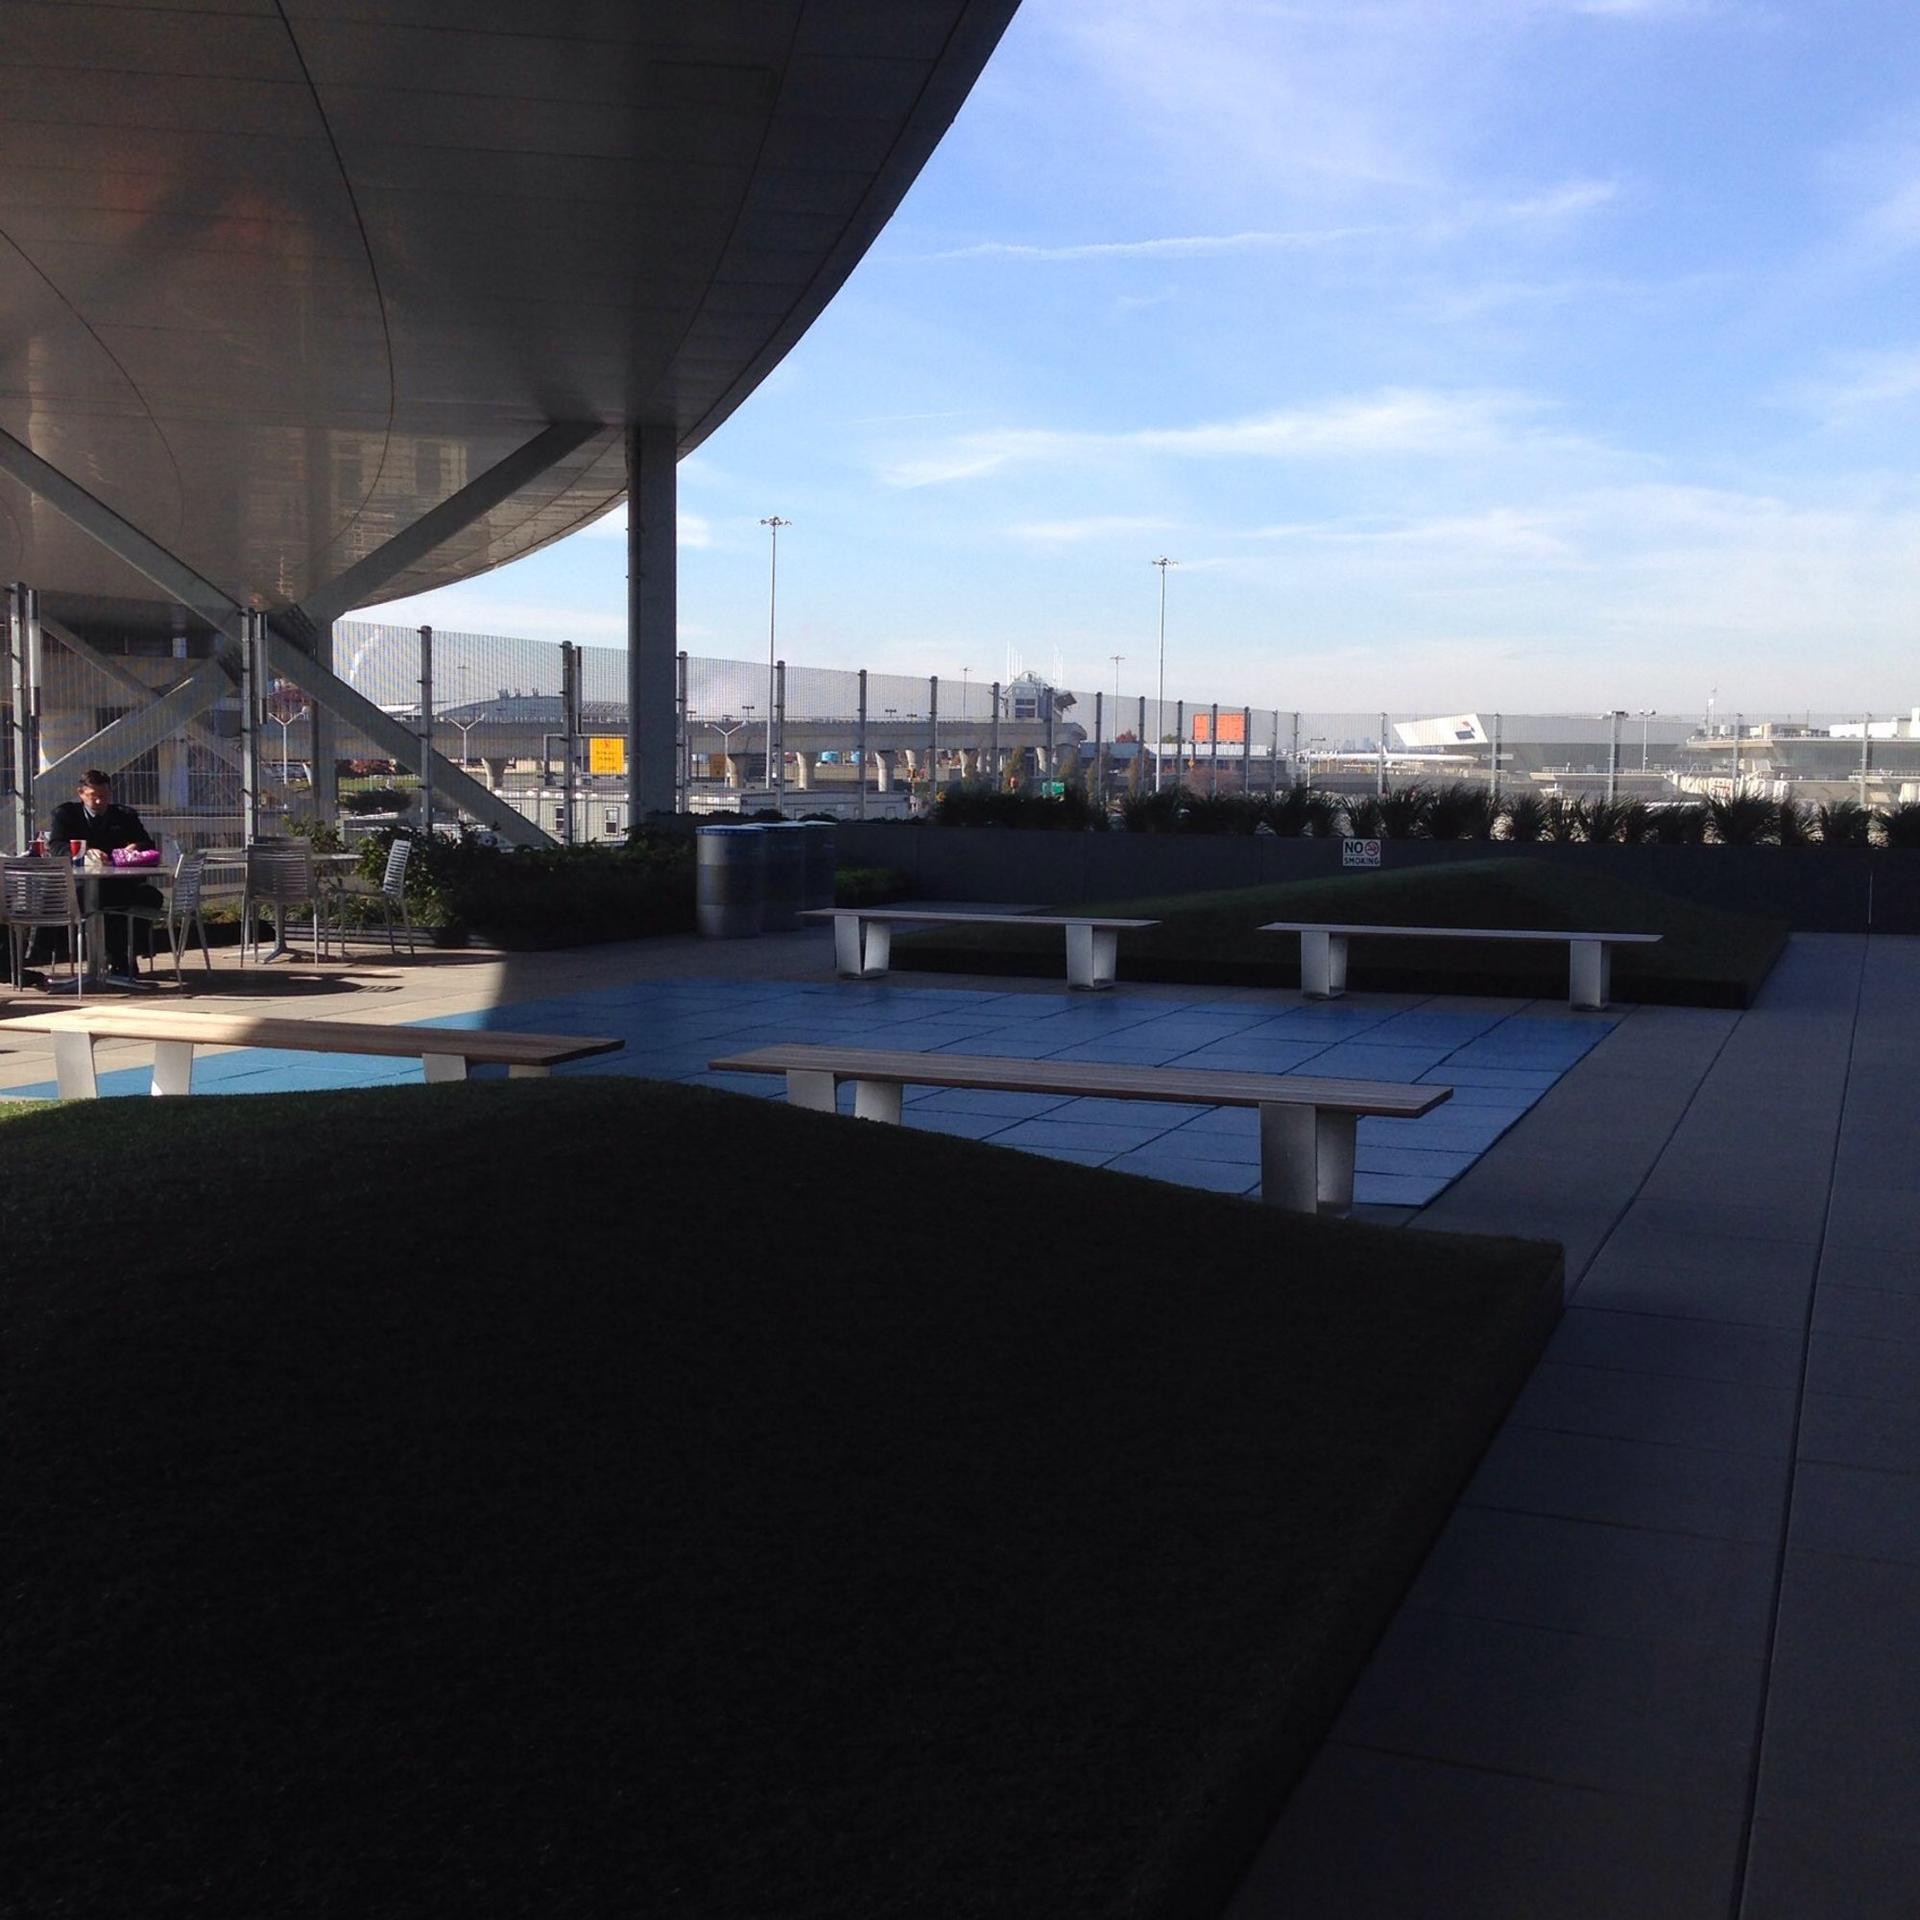 JetBlue Rooftop Terrace image 1 of 22